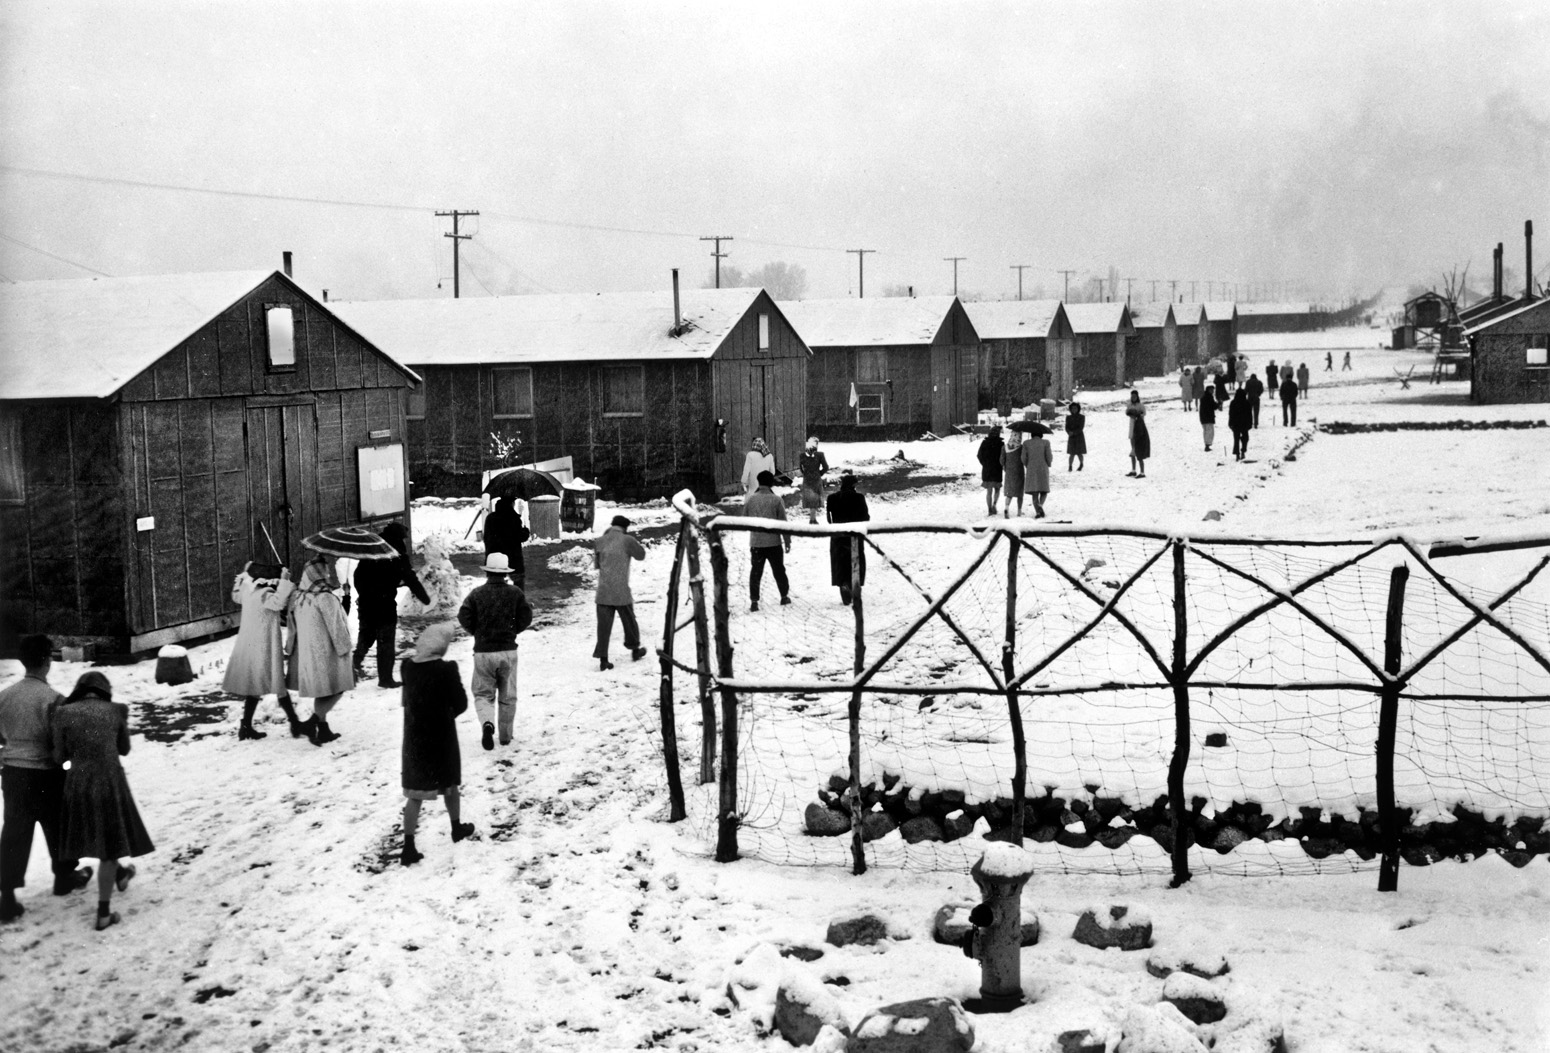 The Manzanar Relocation Center in California’s high desert, between Fresno and Death Valley, held over 11,000 internees, mostly from Los Angeles, at its height. Here, Japanese Americans walk through the camp on a snowy winter day in 1943. 